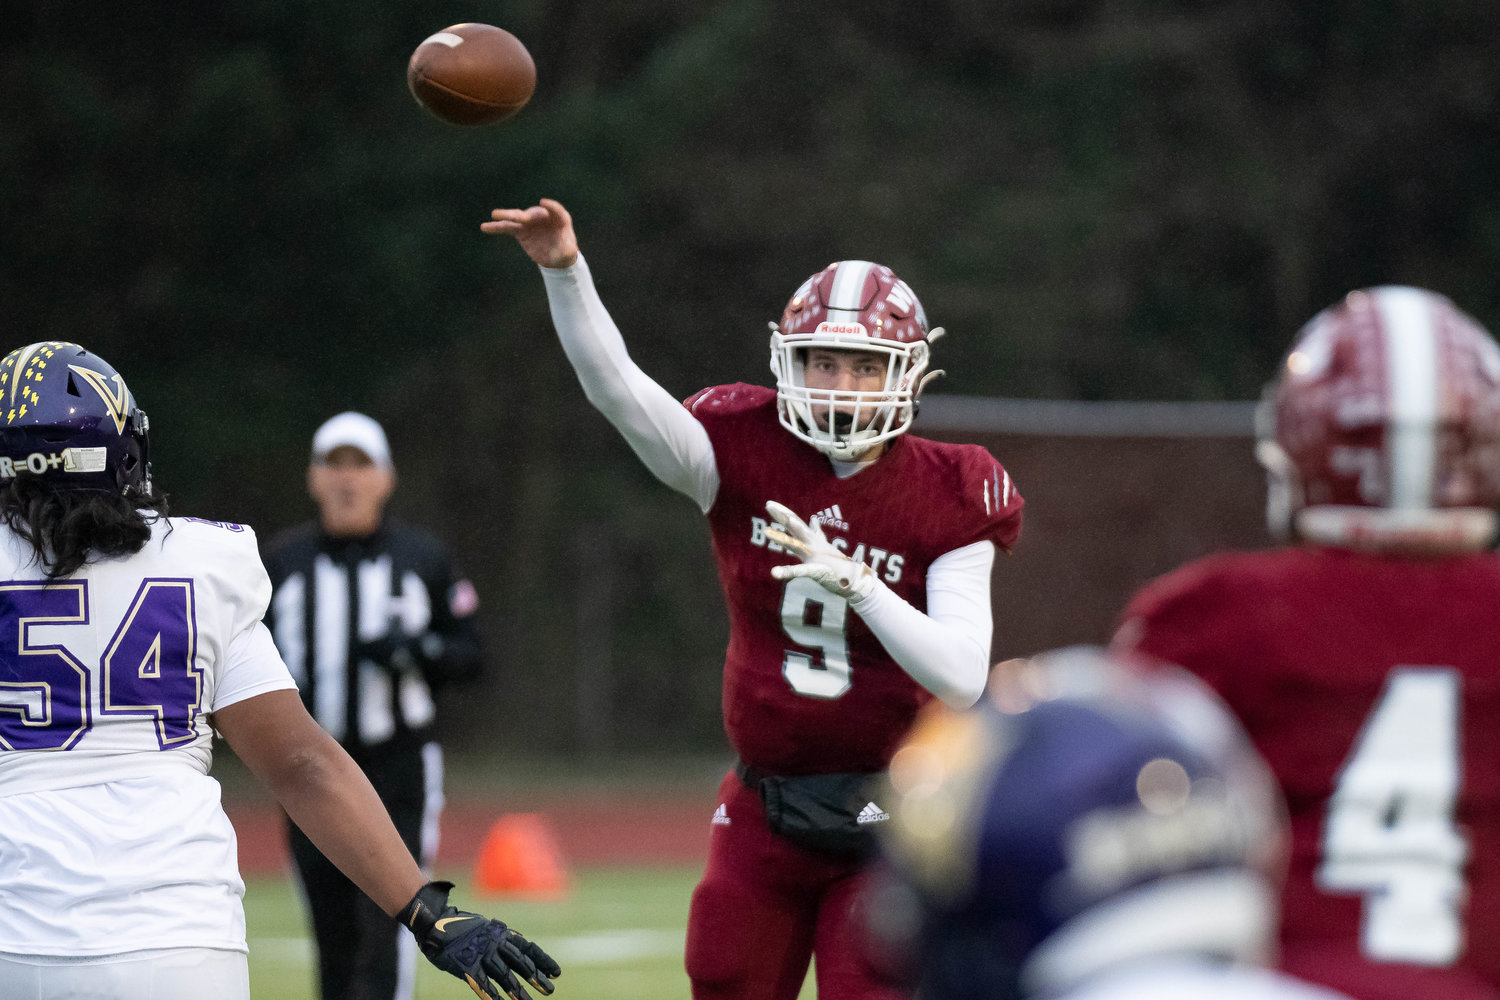 W.F. West quarterback Gavin Fugate throws a screen against North Kitsap in the 2A state semifinals Nov. 26 at Tumwater District Stadium.